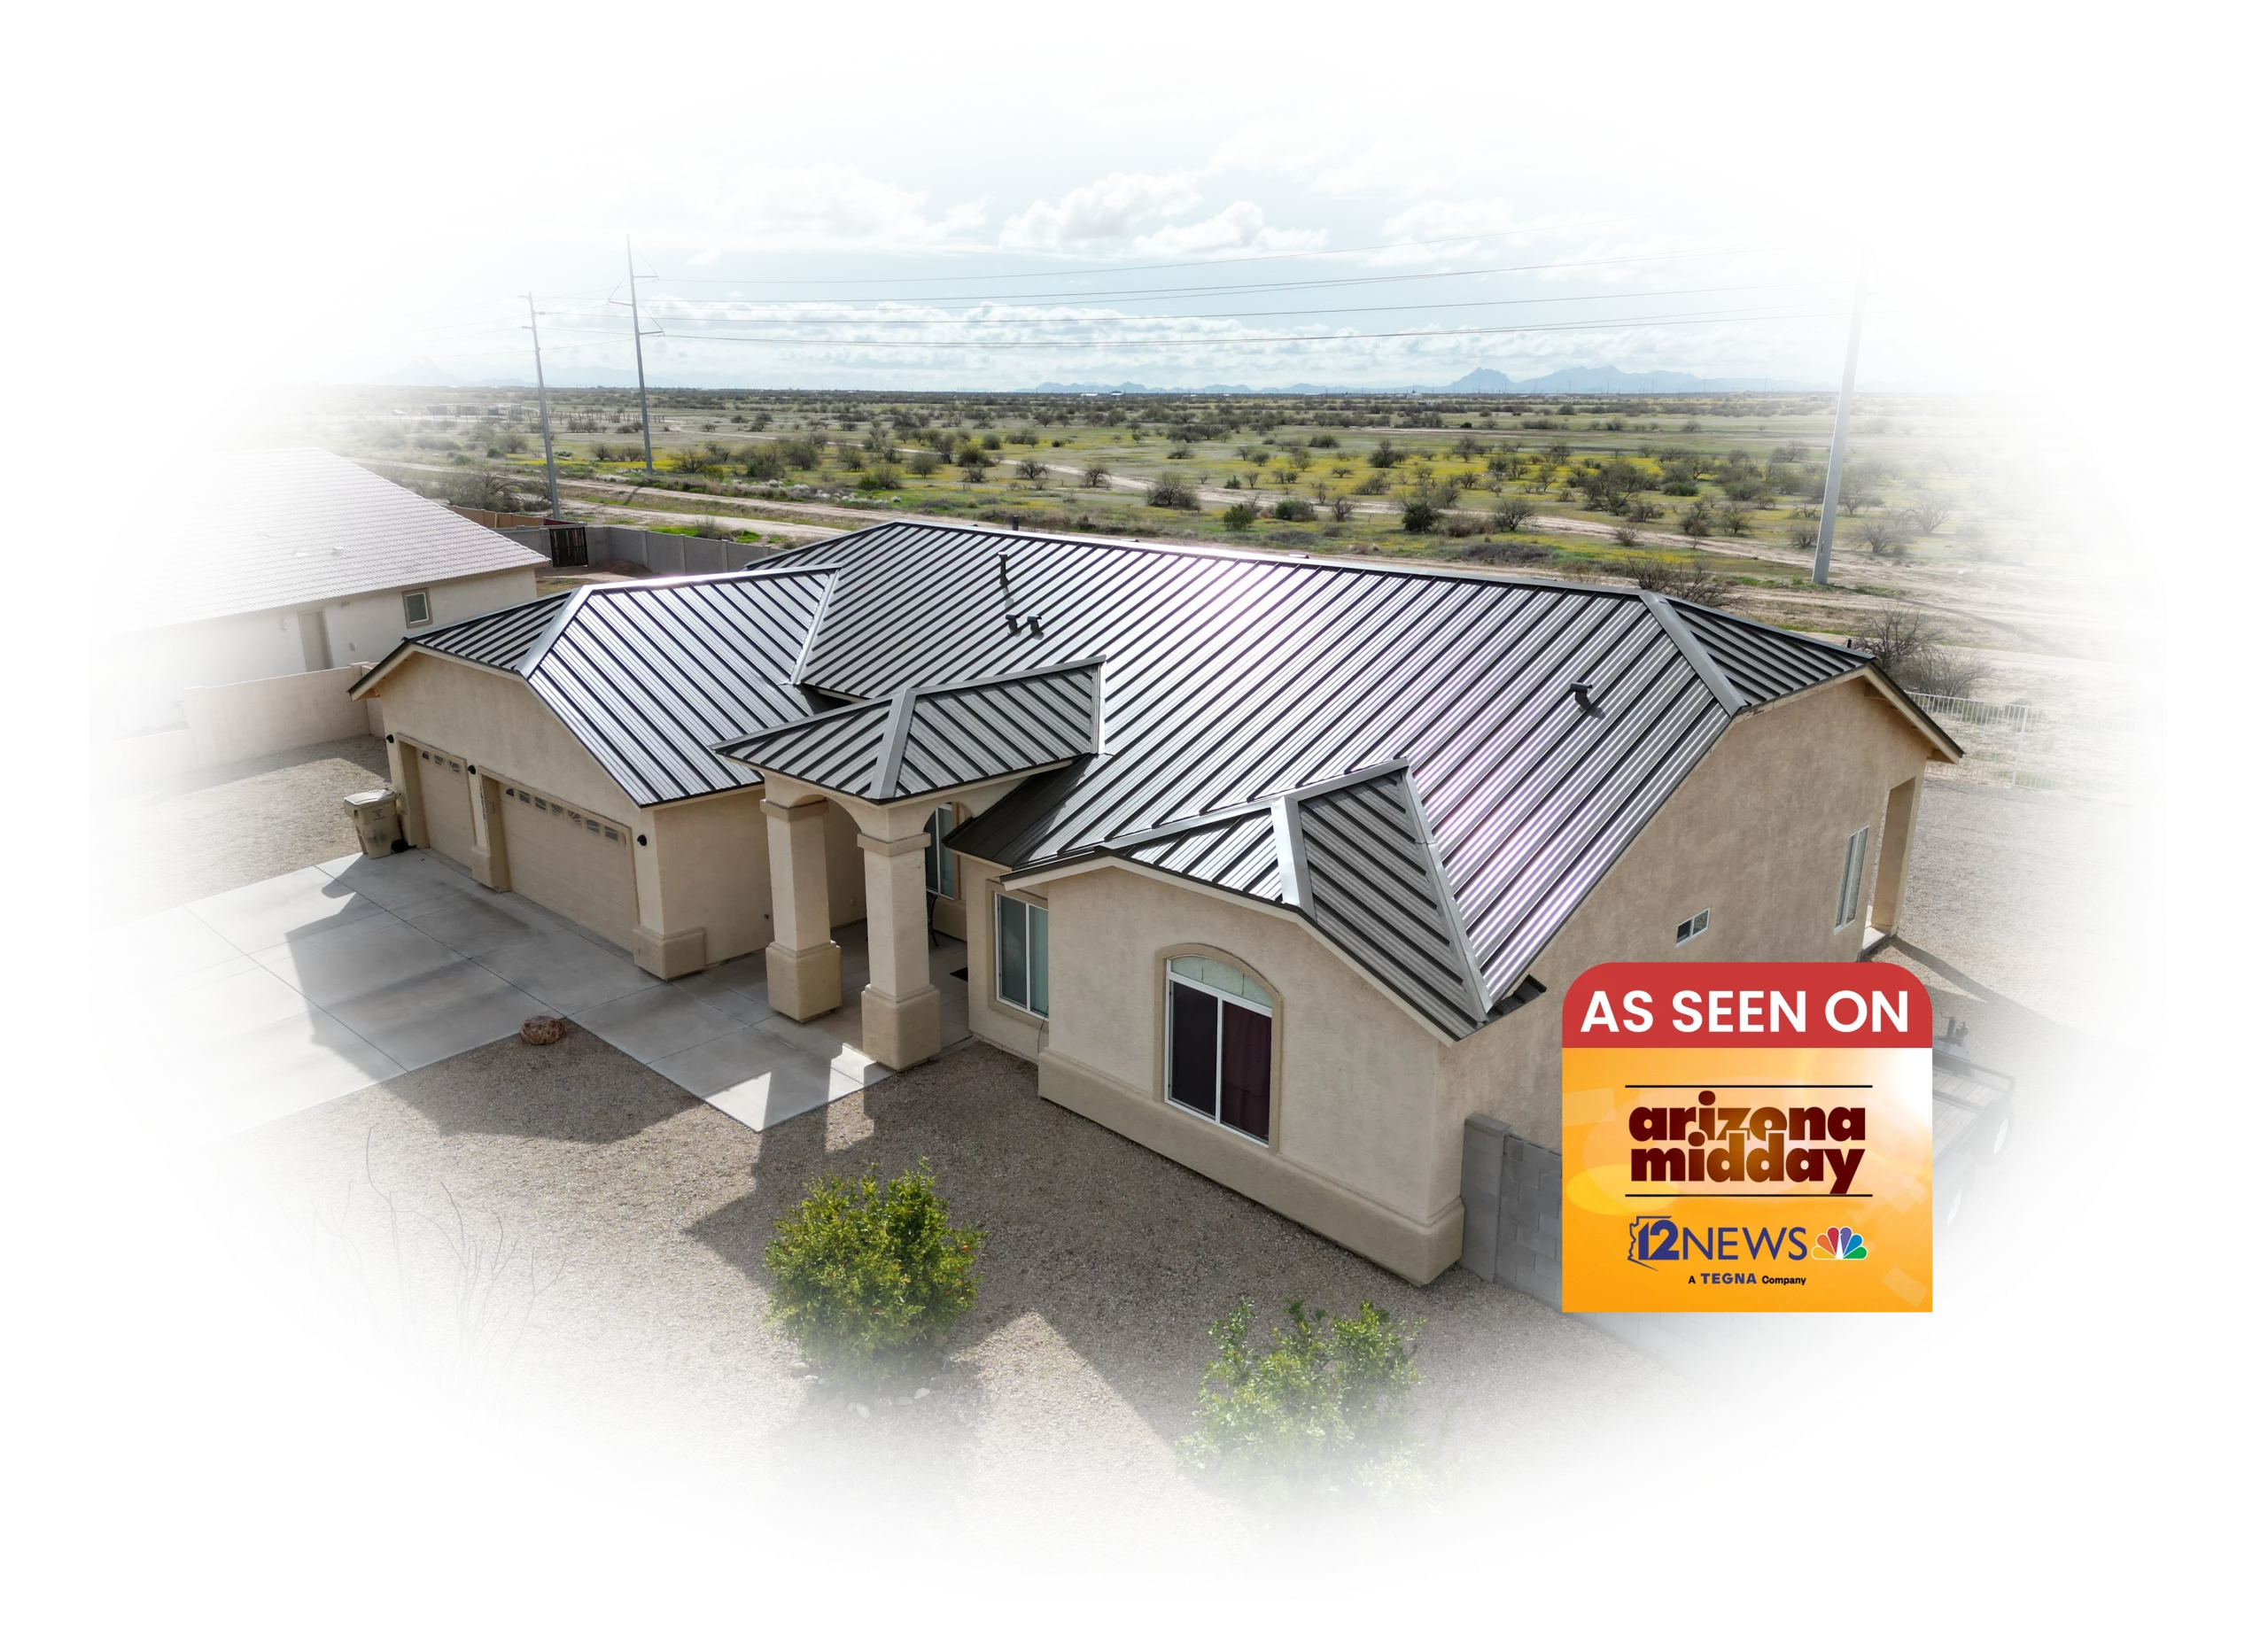 Reimagine Roofing as seen on Arizona Midday 12 News